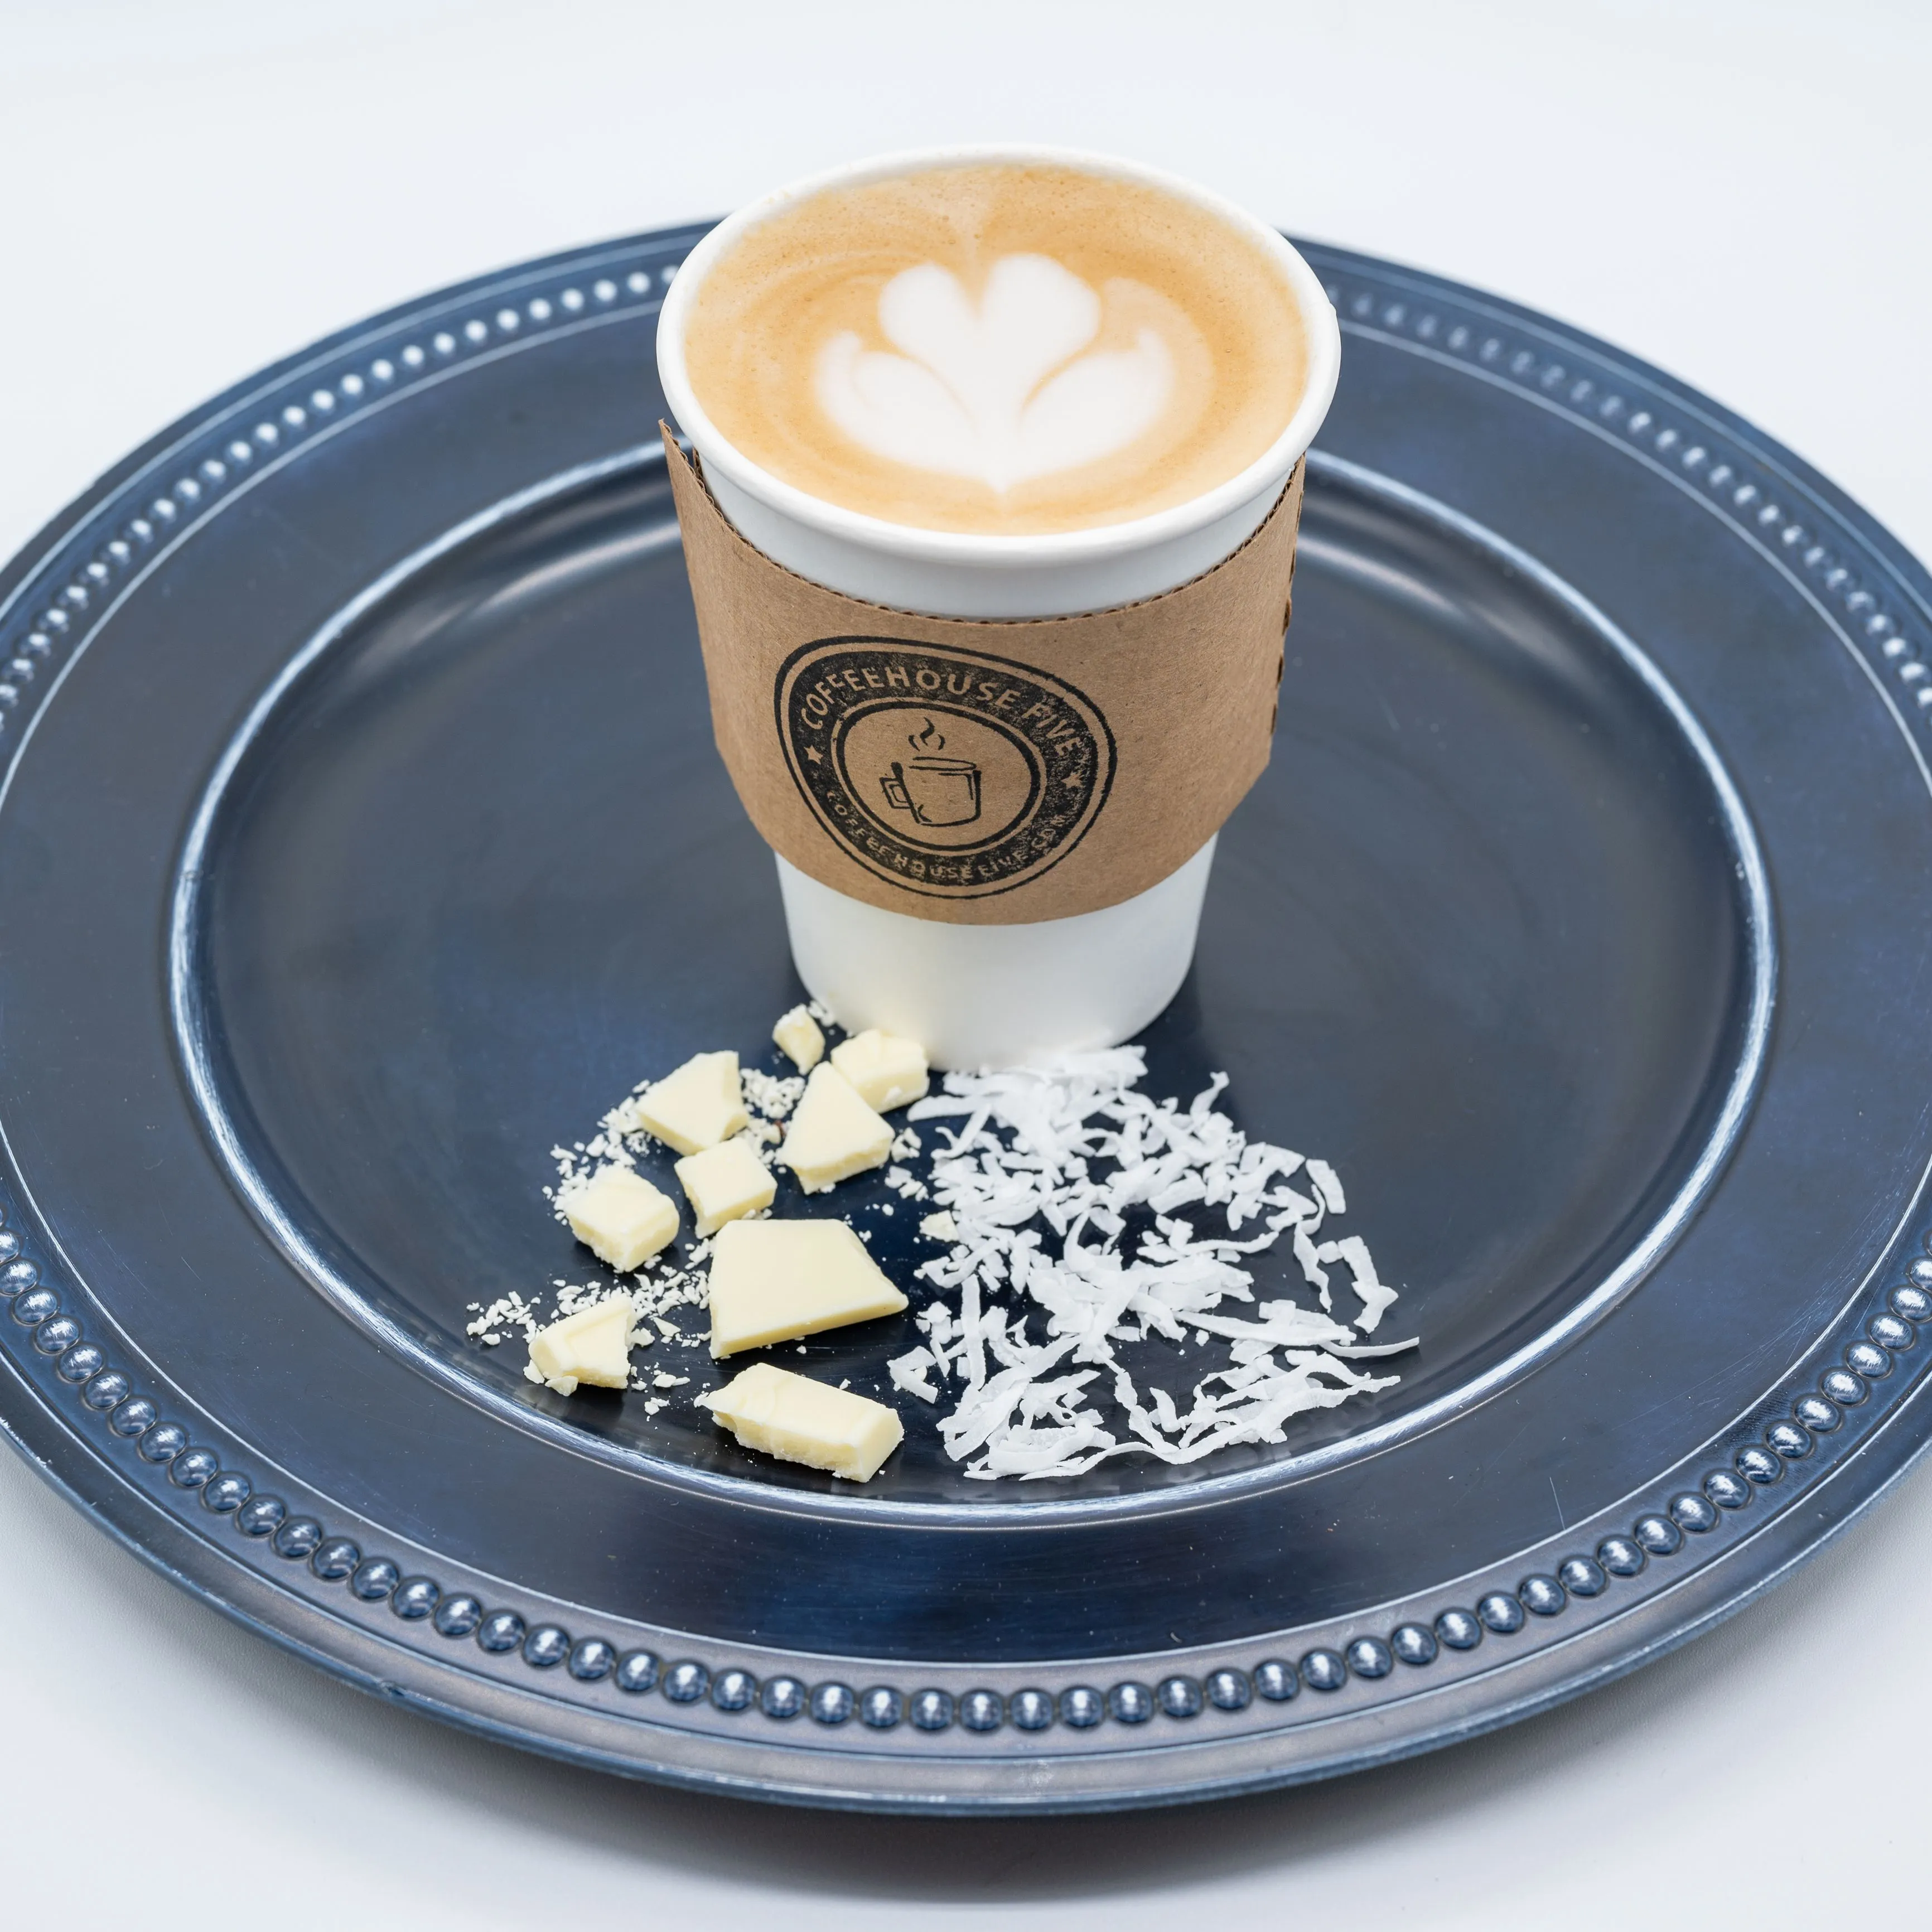 A paper cup of cappuccino with latte art on top, placed on a navy blue plate accompanied by a few pieces of white chocolate and shredded coconut, isolated on a white background.